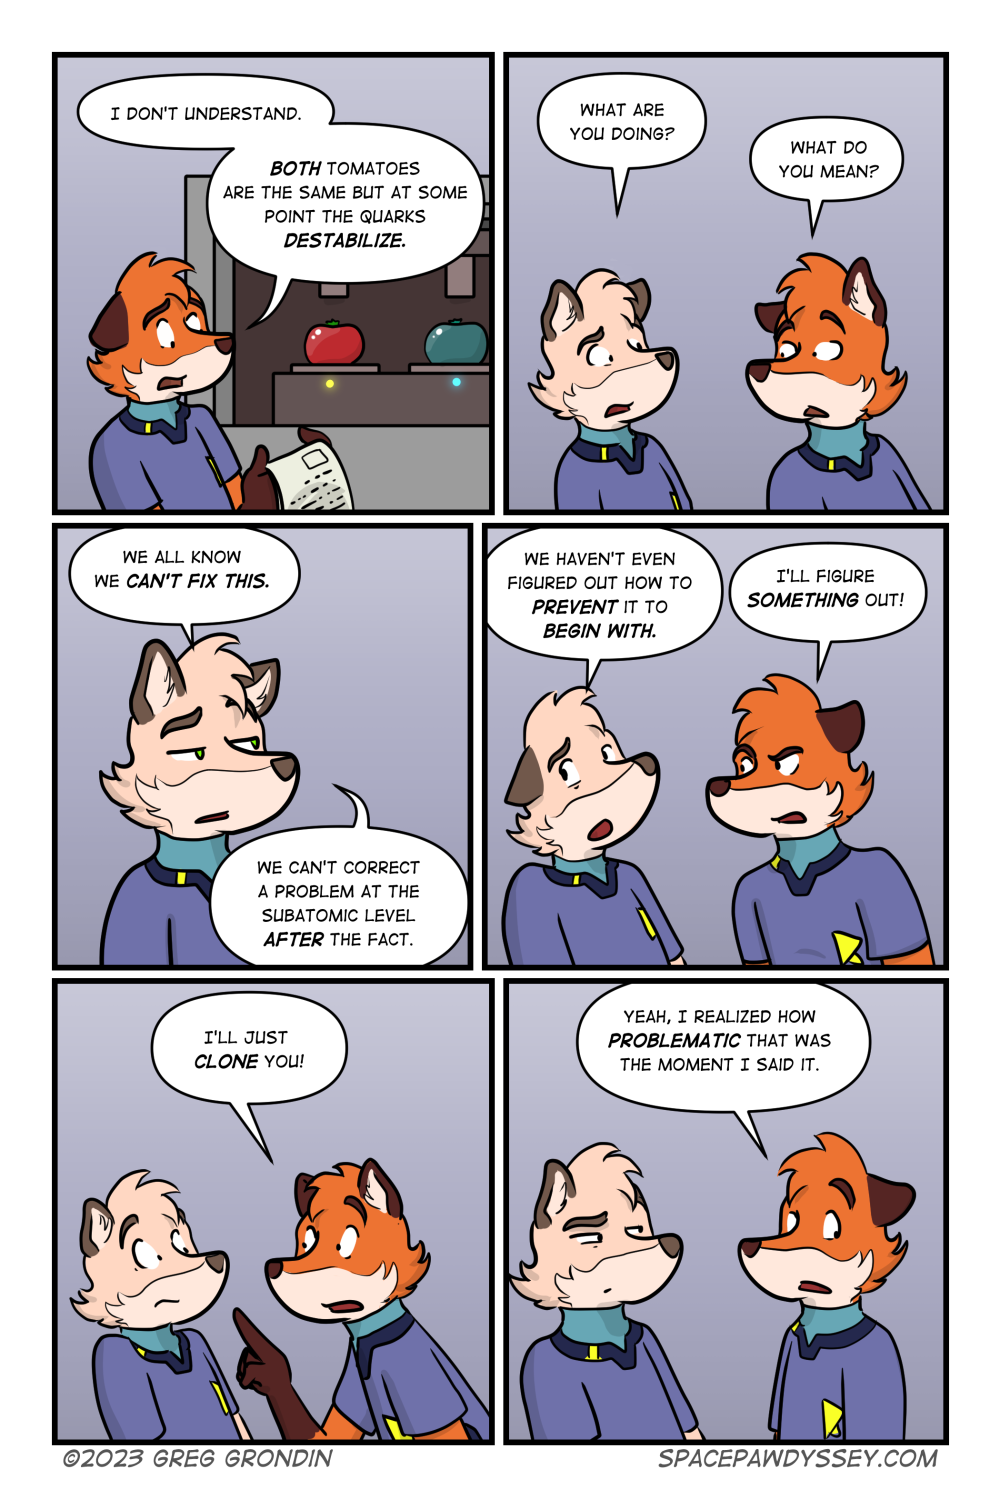 Space Pawdyssey #633